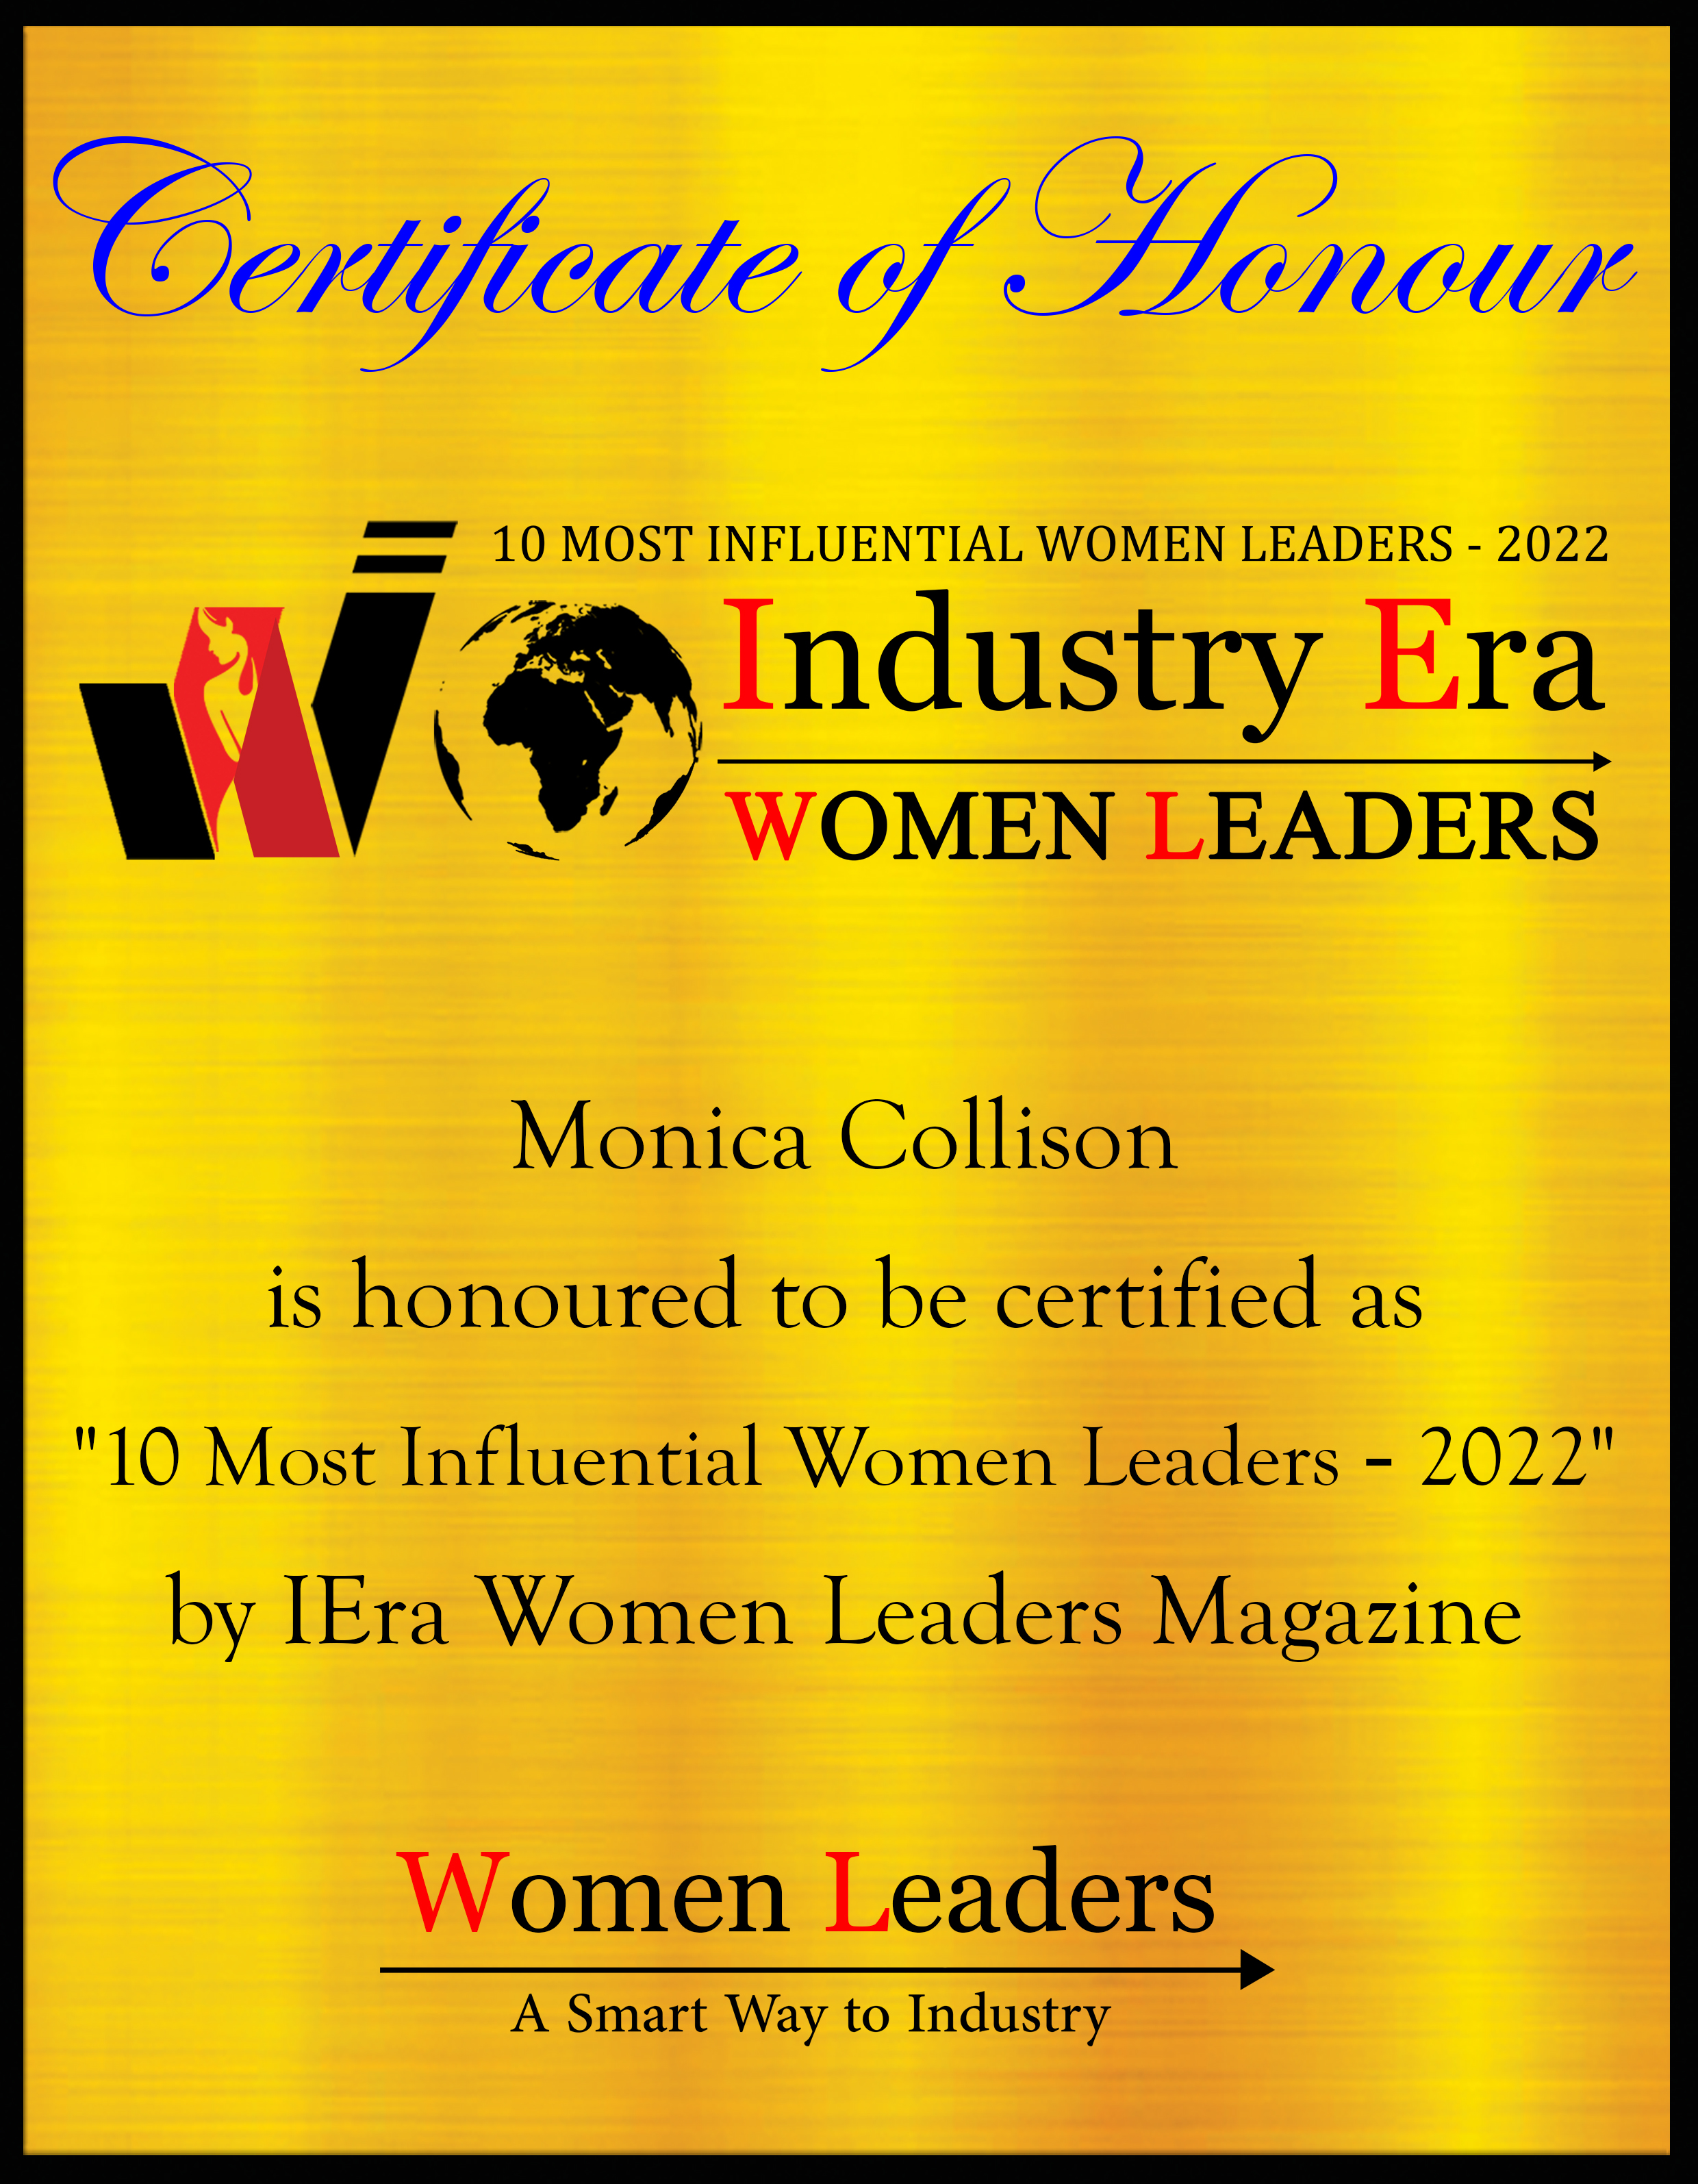 Monica Collison, President and CEO of Union Mutual Insurance Company, 10 Most Influential Women Leaders of 2022